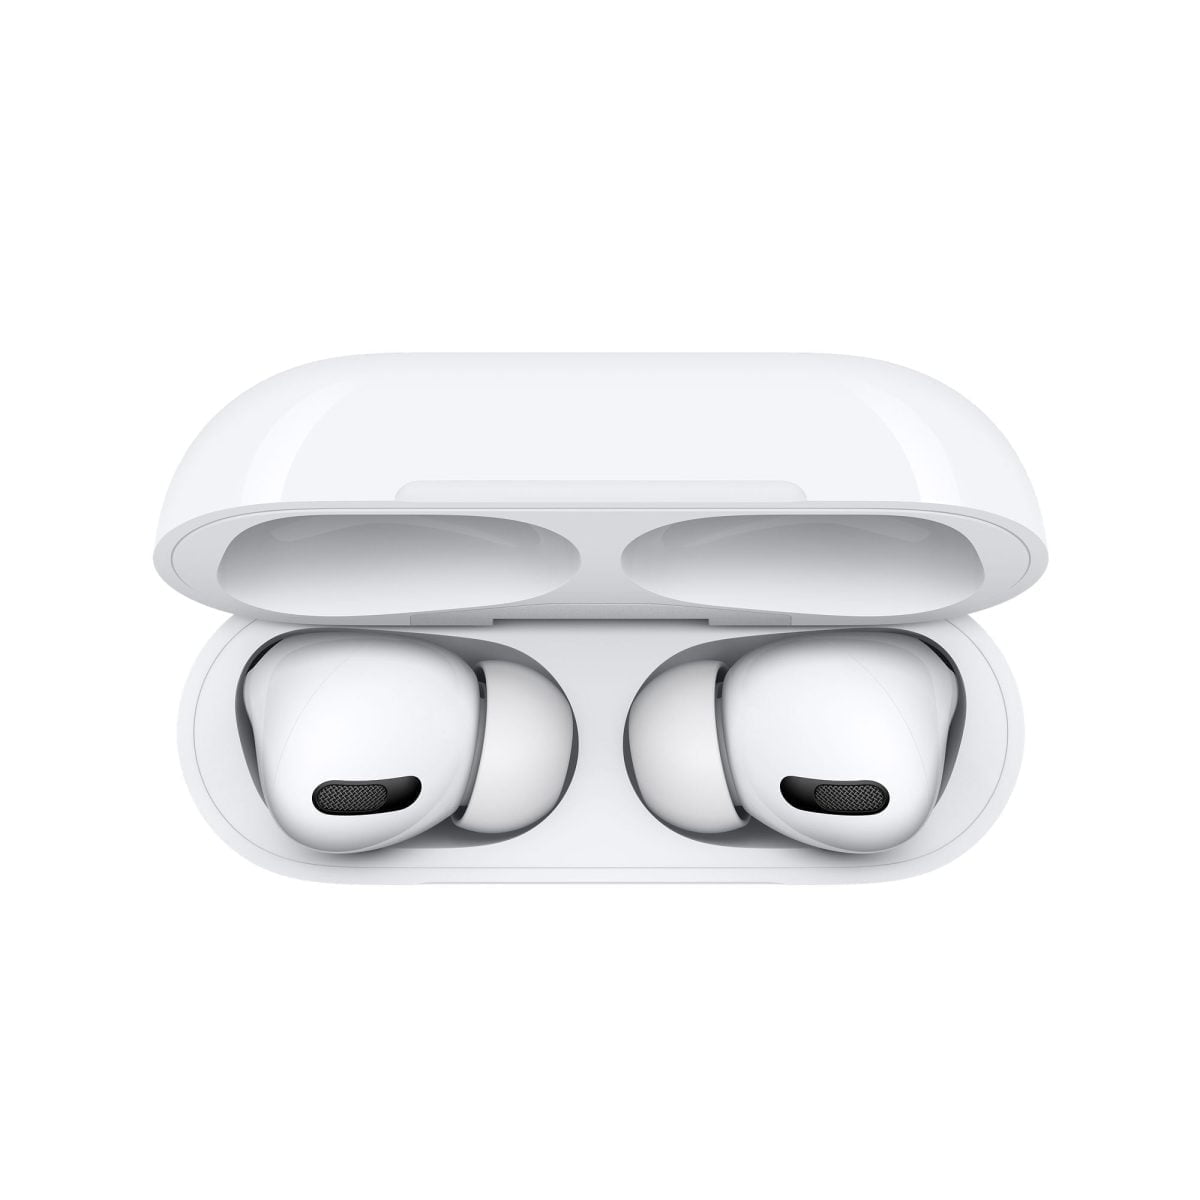 Airpods Pro Apple &Lt;Div Class=&Quot;Rc-Pdsection-Sidepanel Column Large-3 Small-12&Quot;&Gt; &Lt;H1&Gt;Apple Airpods Pro (2Nd Generation) - White Mqd83&Lt;/H1&Gt; &Lt;/Div&Gt; &Lt;Div Class=&Quot;Rc-Pdsection-Mainpanel Column Large-9 Small-12&Quot;&Gt; &Lt;P Class=&Quot;H4-Para-Title&Quot;&Gt;Airpods Pro Feature Up To 2X More Active Noise Cancellation, Plus Adaptive Transparency, And Personalized Spatial Audio With Dynamic Head Tracking For Immersive Sound.² Now With Multiple Ear Tips (Xs, S, M, L) And Up To 6 Hours Of Listening Time.&Lt;/P&Gt; &Lt;/Div&Gt; Airpods Pro Apple Airpods Pro (2Nd Generation) - White Mqd83